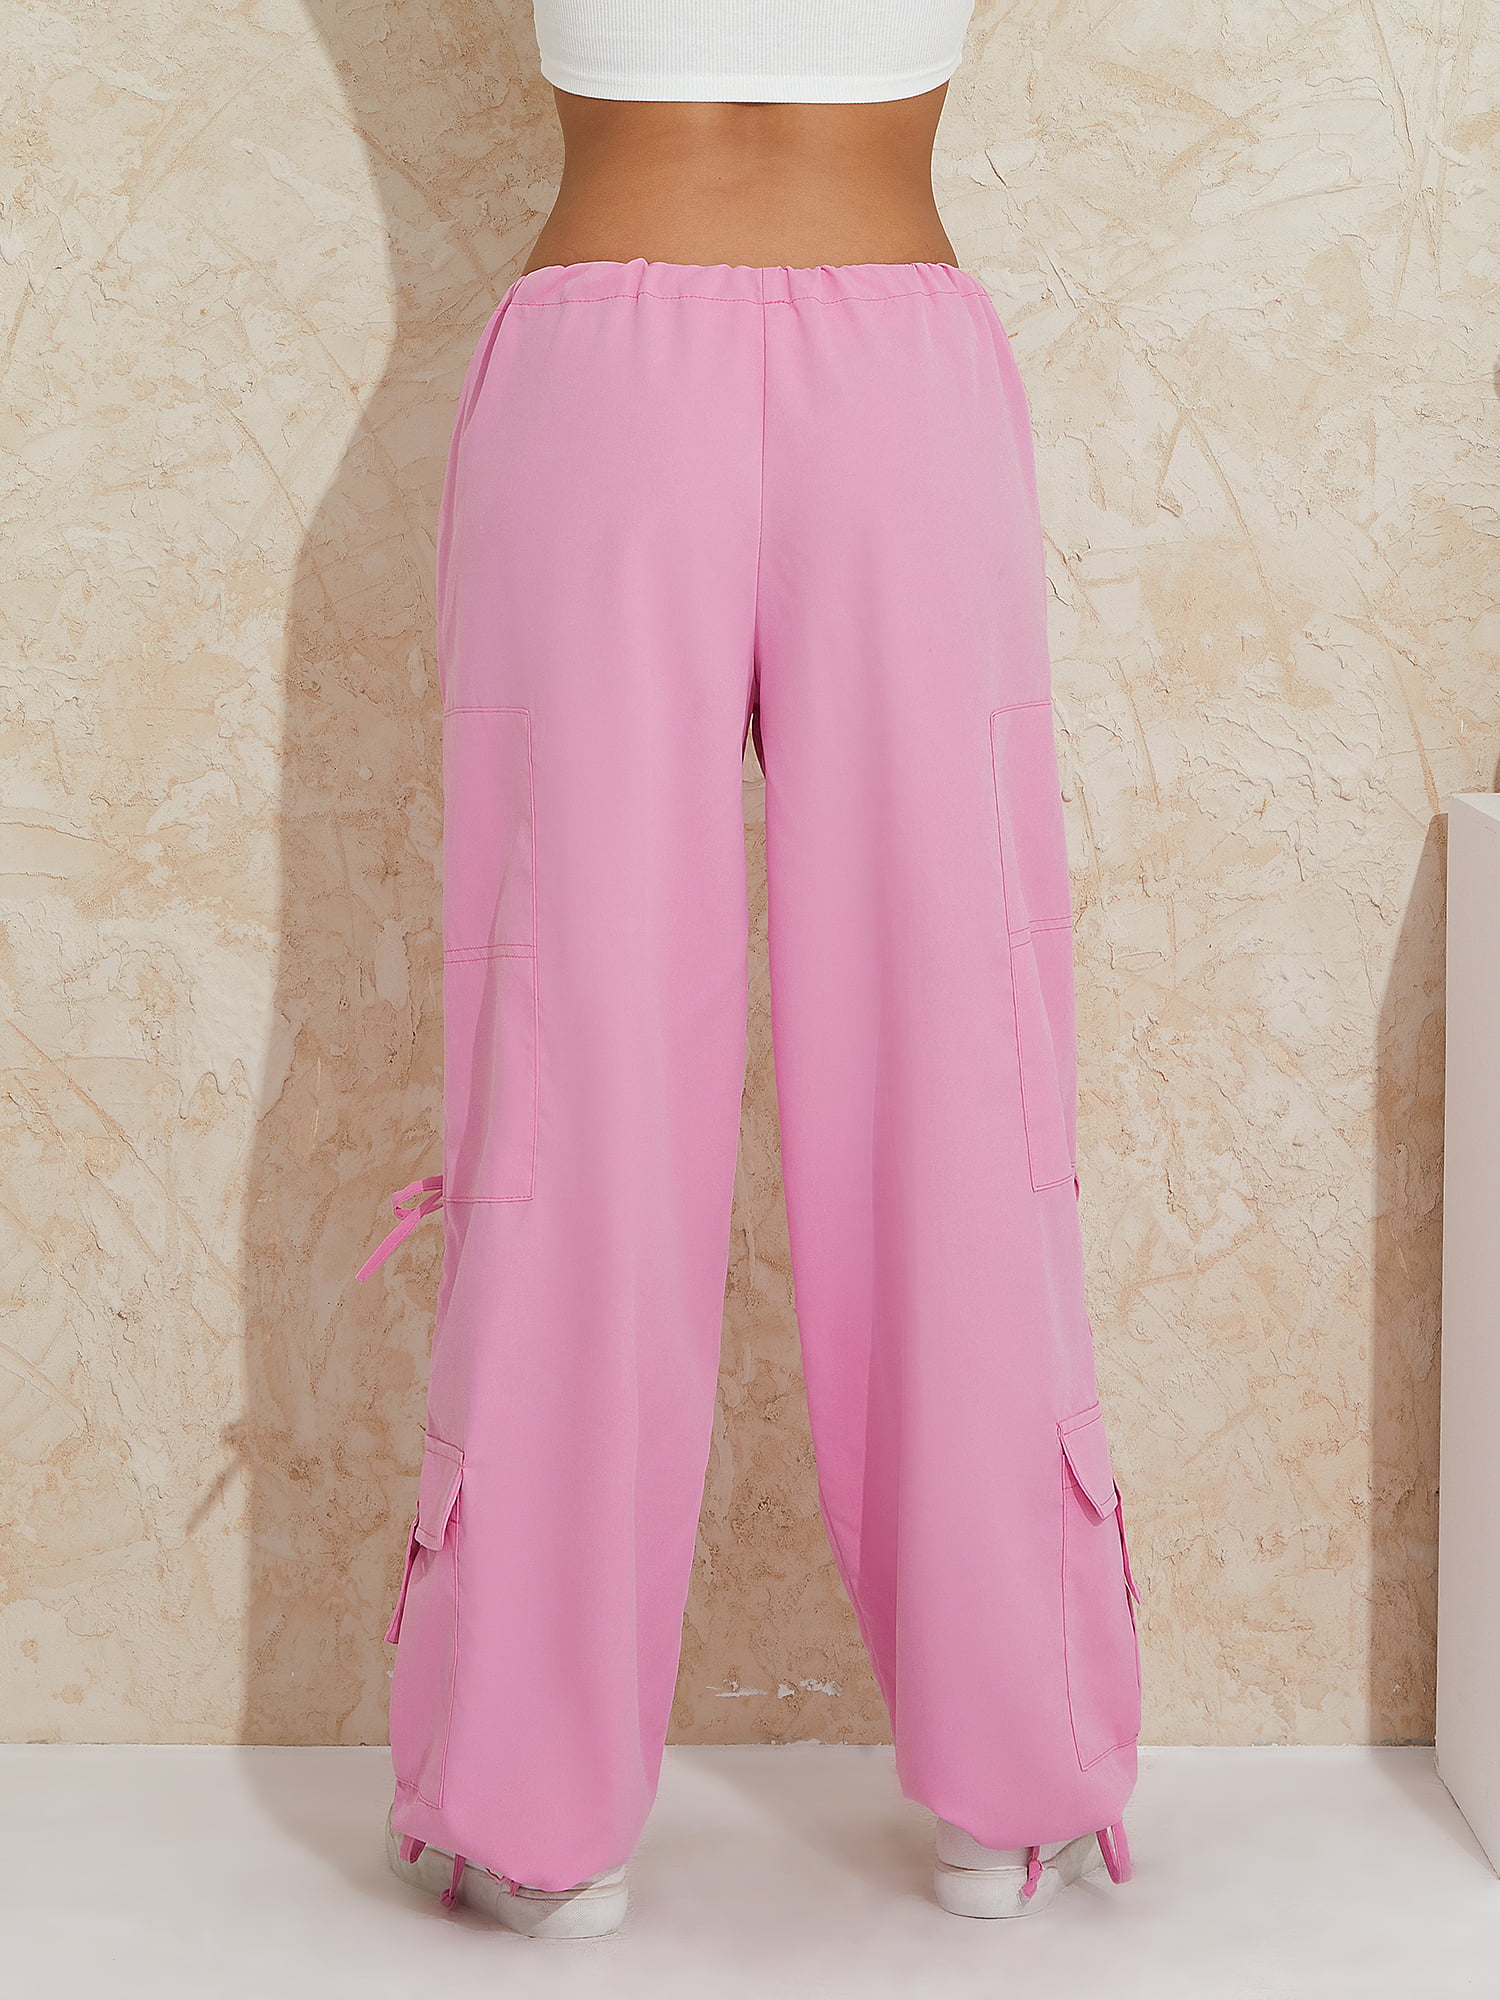 Fuchsia Pants Outfits For Stylish Ladies | Pink pants outfit, Pink trousers  outfit, Hot pink pants